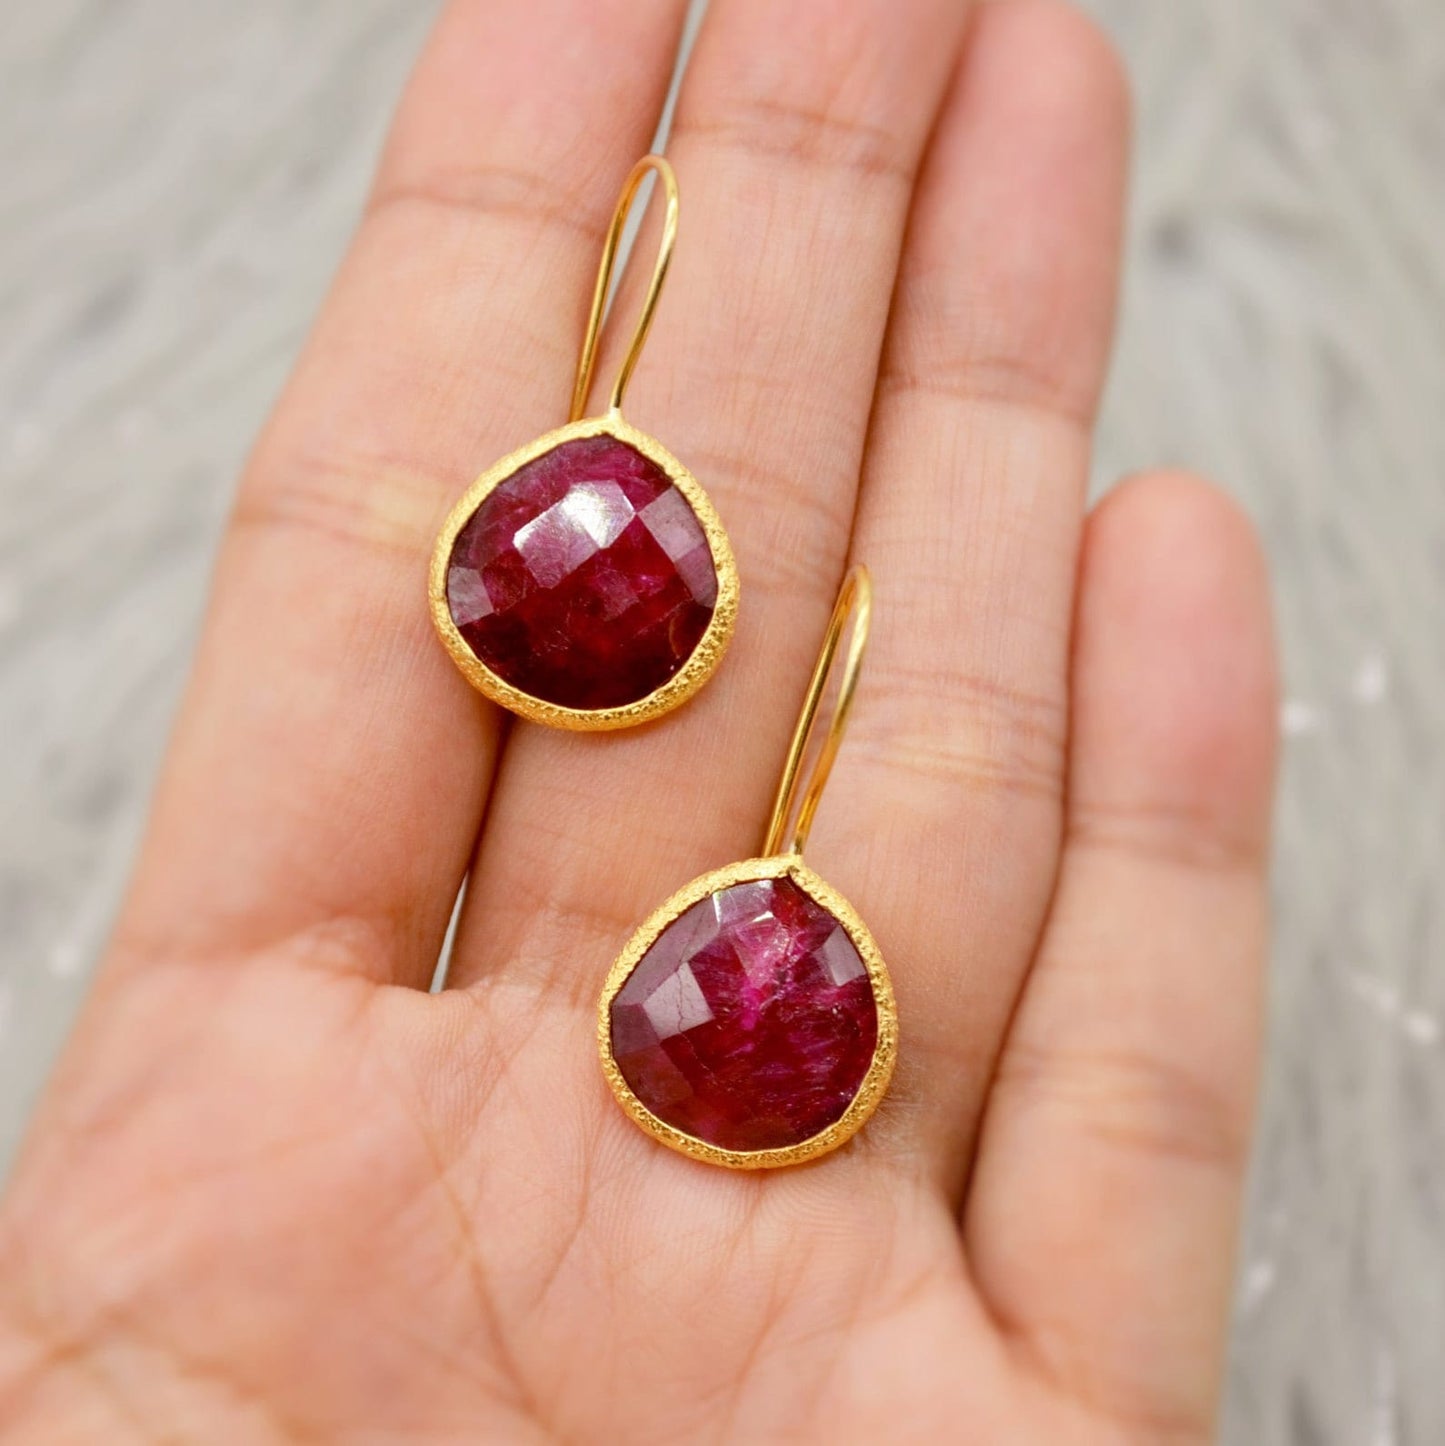 Dyed Red Ruby Silver Dangle Drop Earrings, Gold Plated Sterling Silver, Birthday Gifts For Her, Handmade Gemstone July Birthstone Earrings